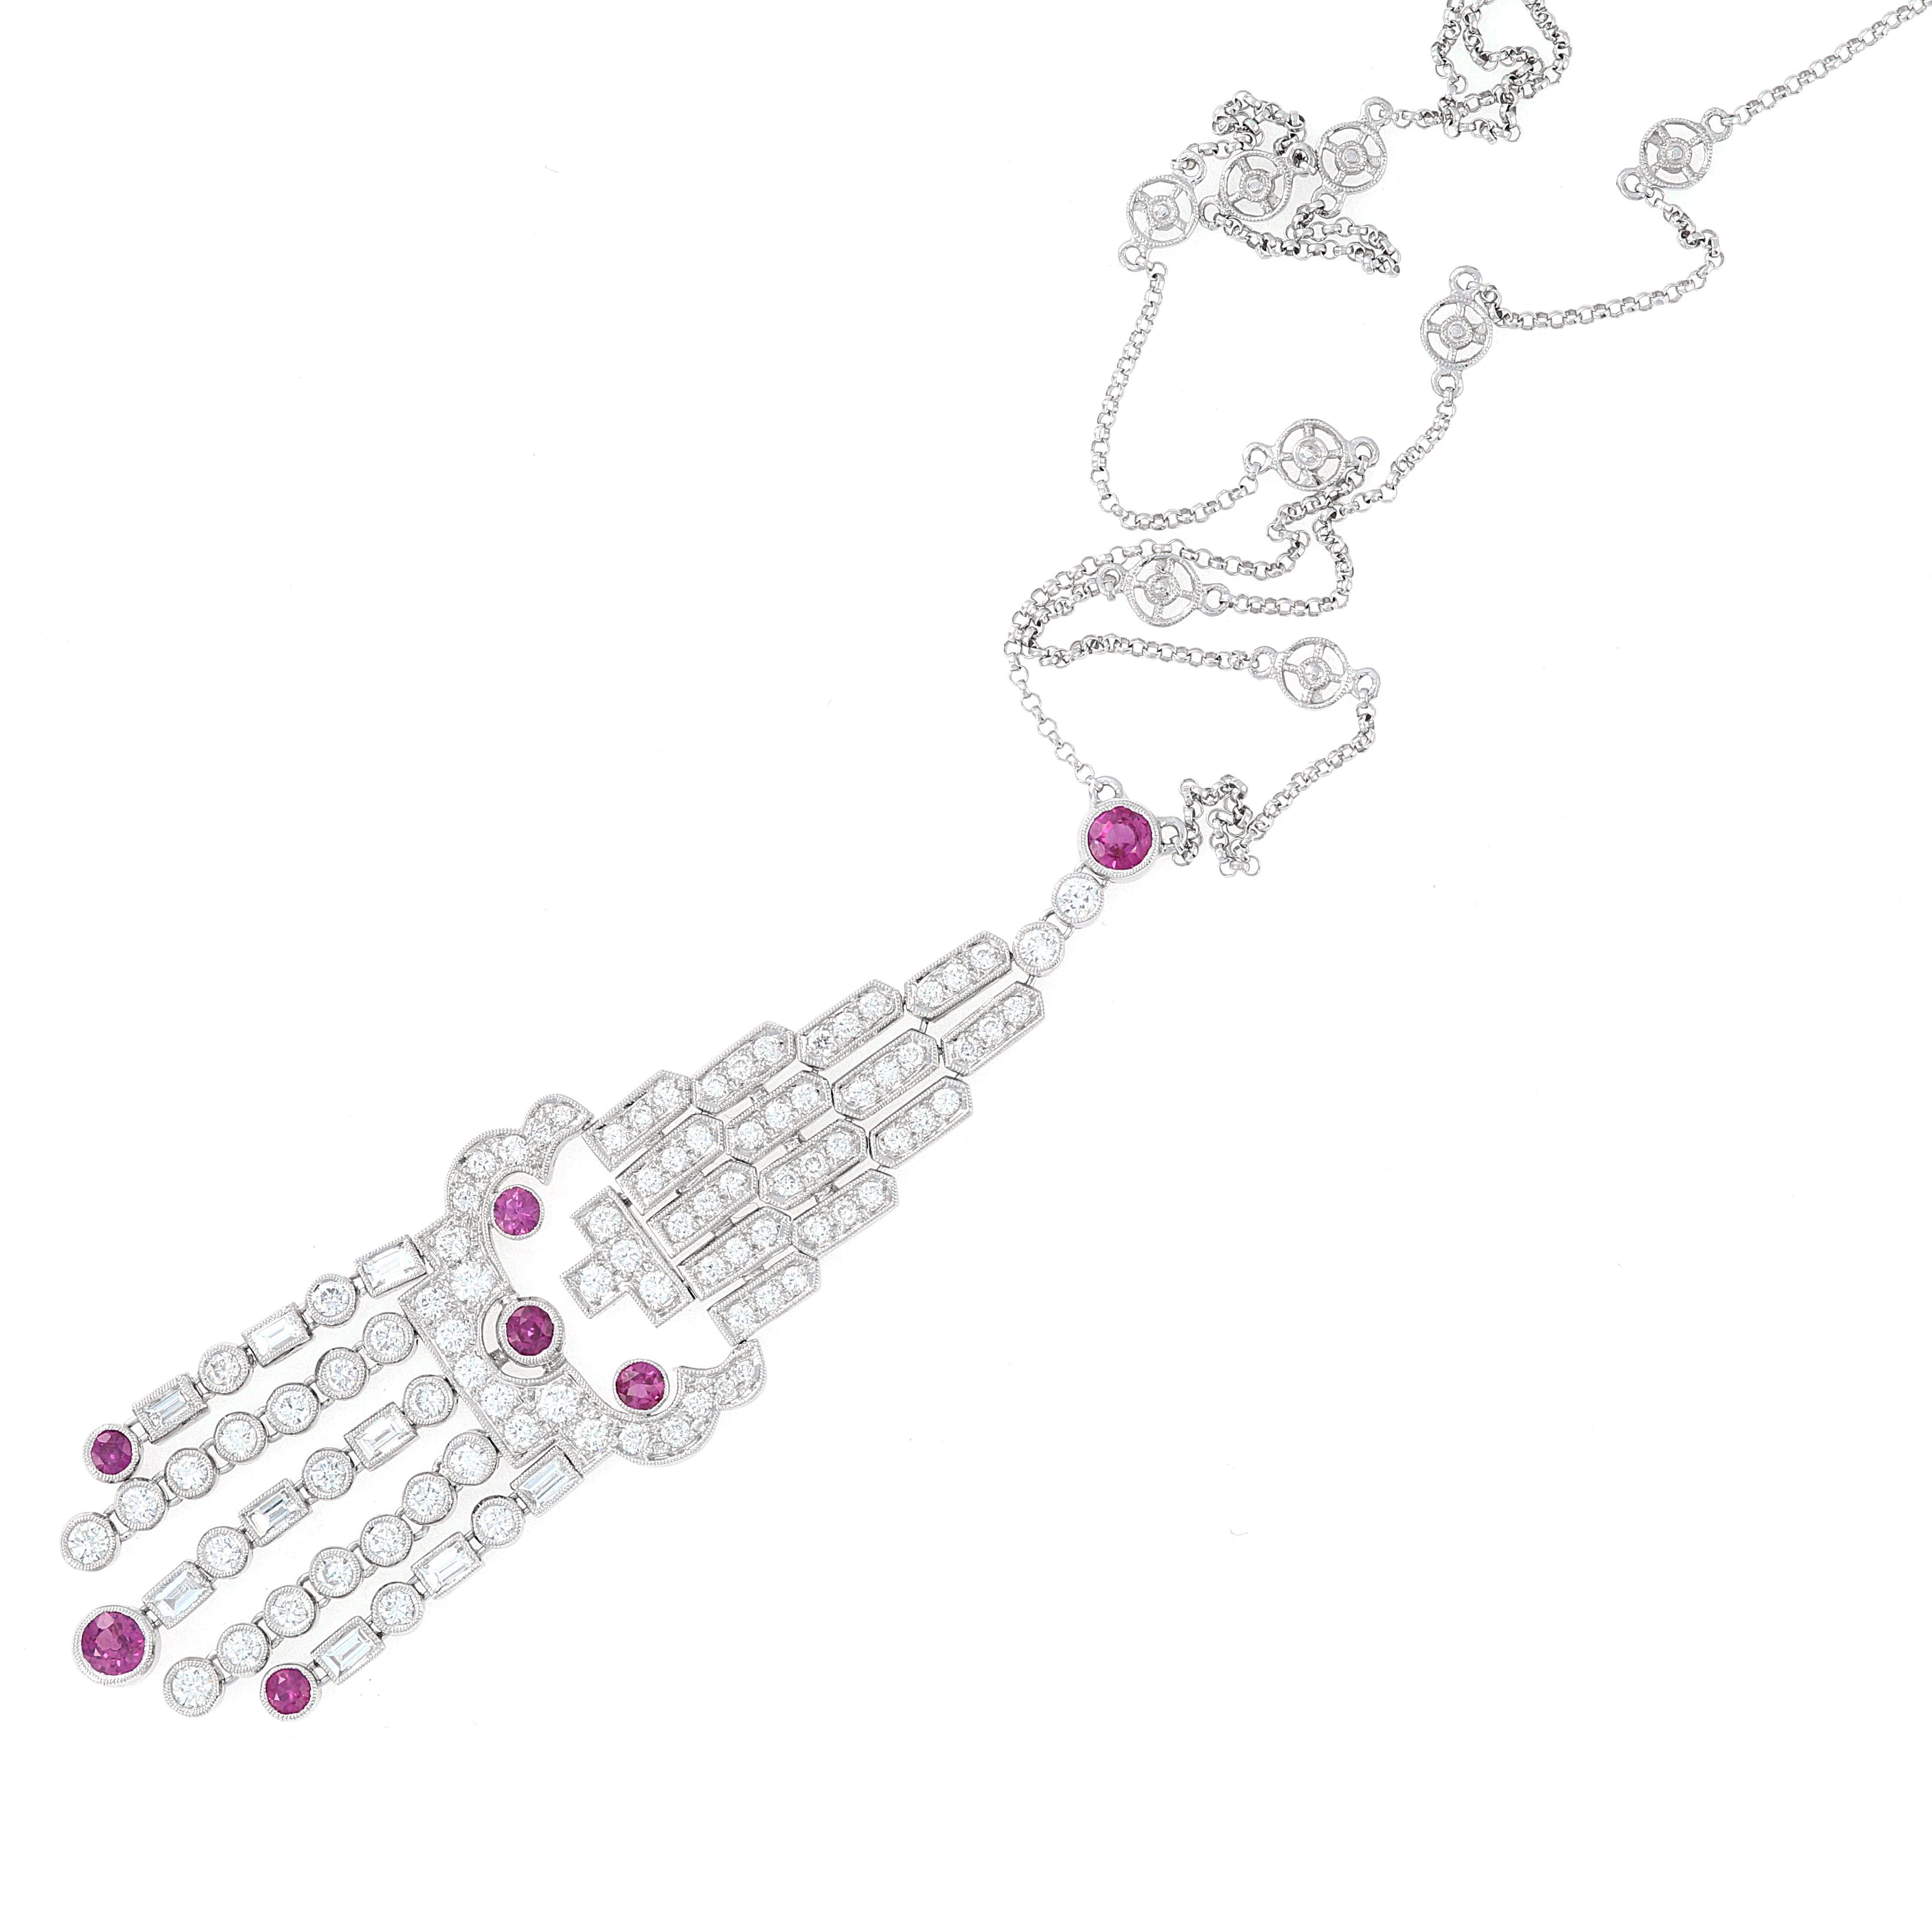 This 18k white gold ruby and diamond necklace has great movement to it. As it sits below the neck, the tassels on the bottom will swing with each step. Diamonds are high quality, white in color and very few inclusions. 

D = 2.20 ctw.
R = 1.25 ctw.